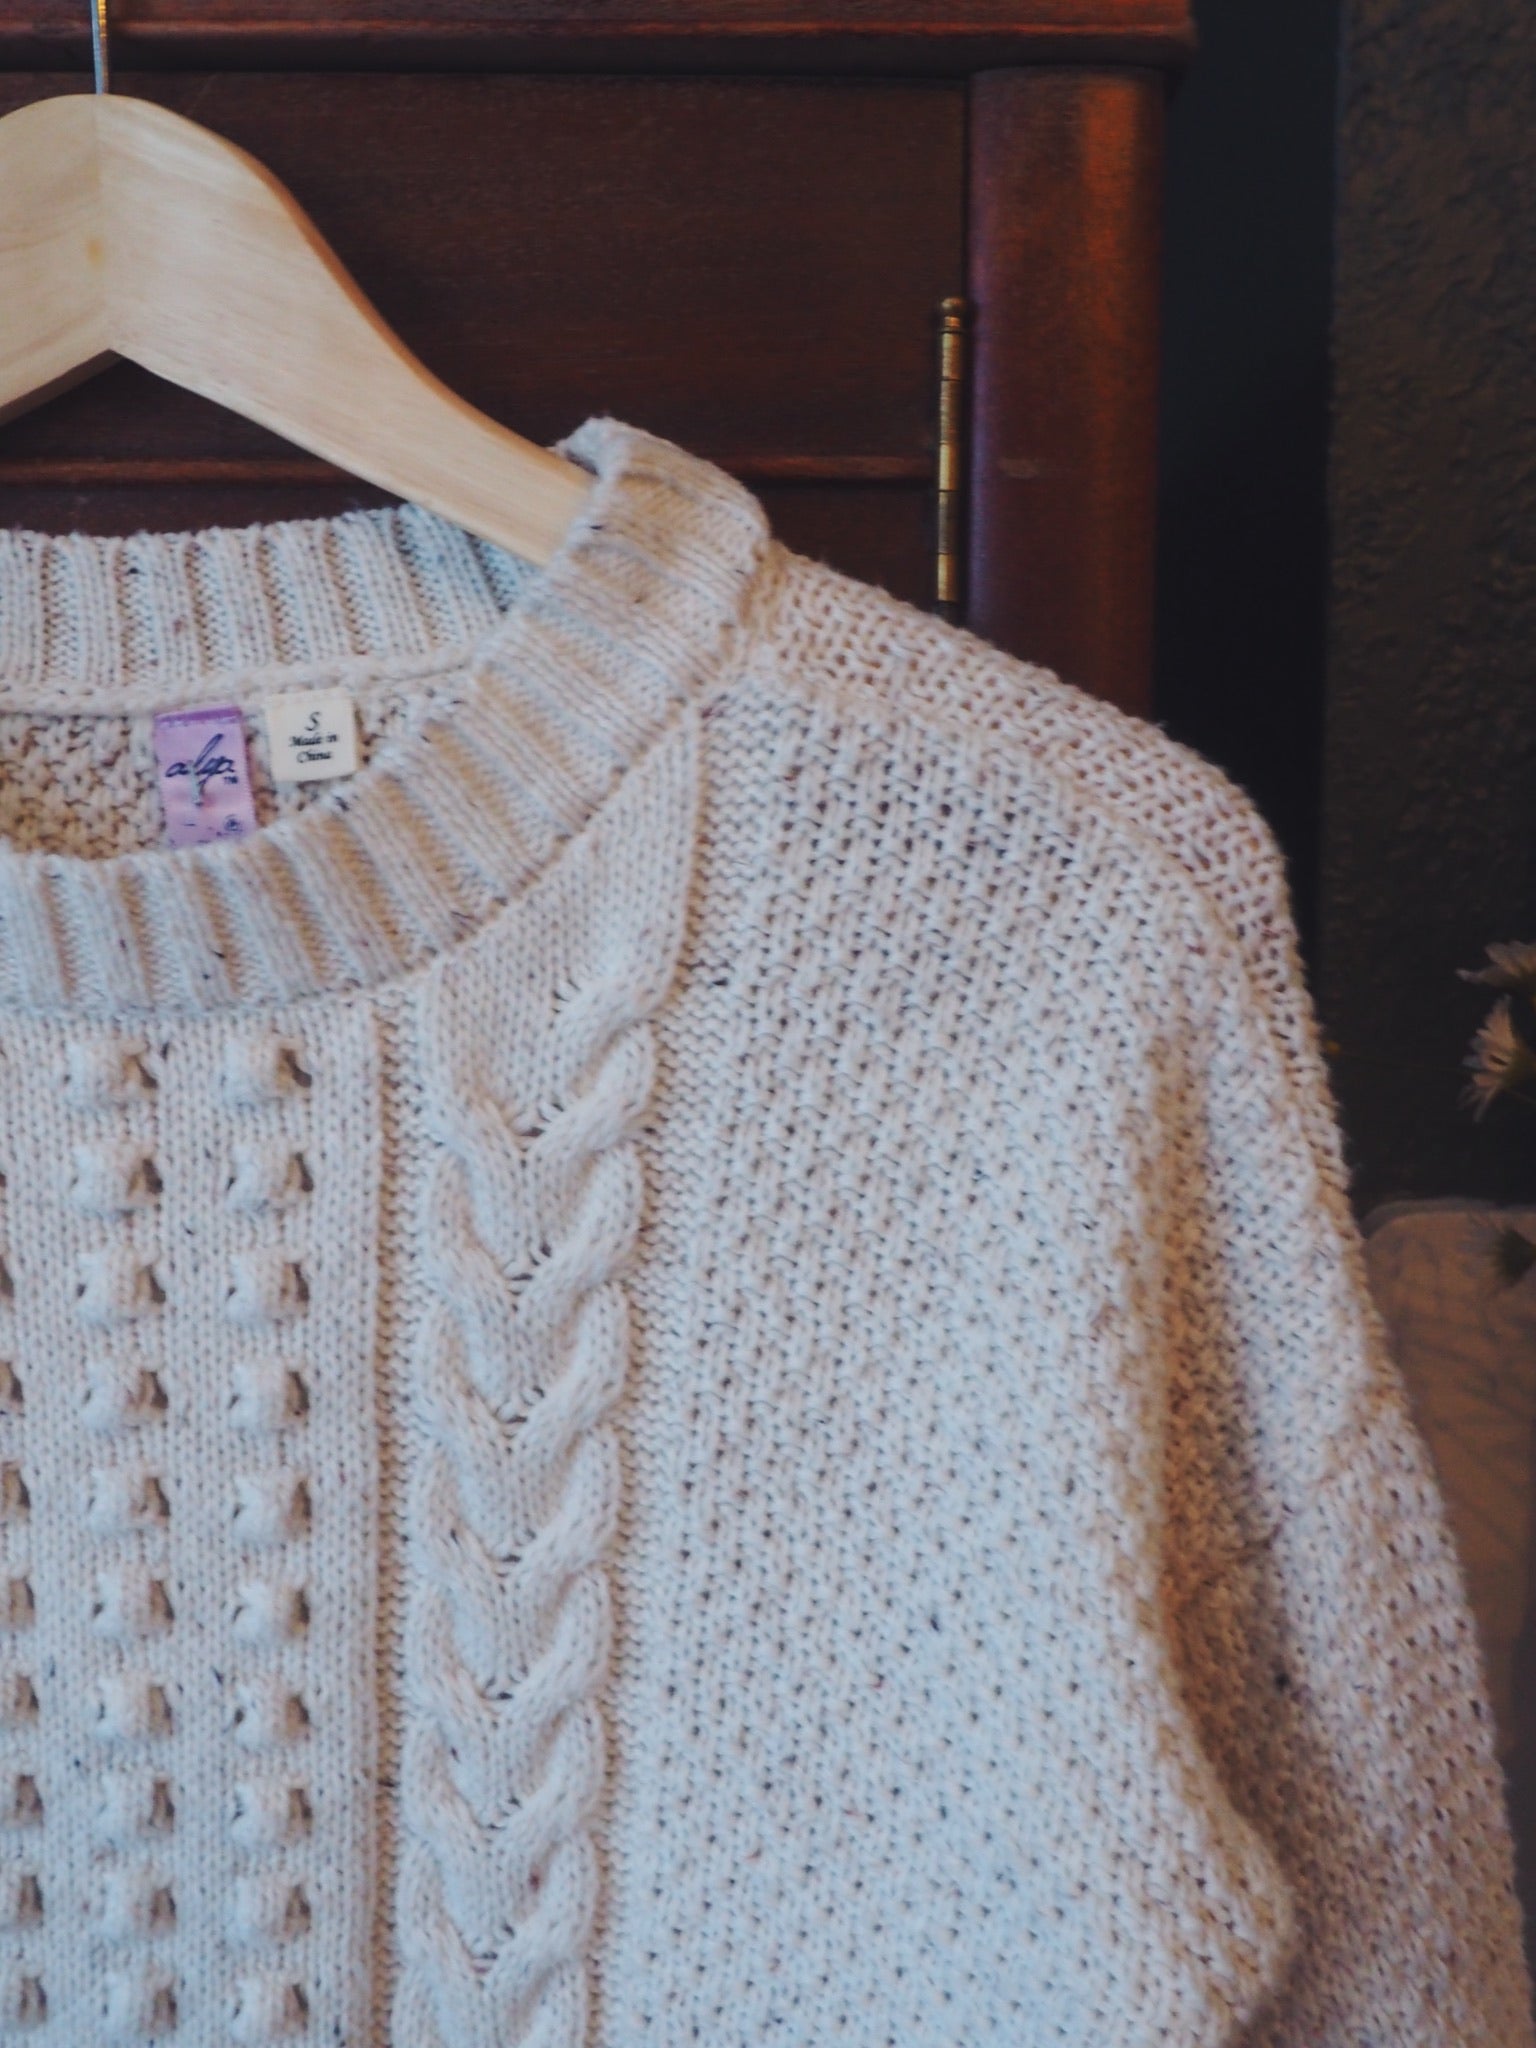 Soft White Cableknit Sweater